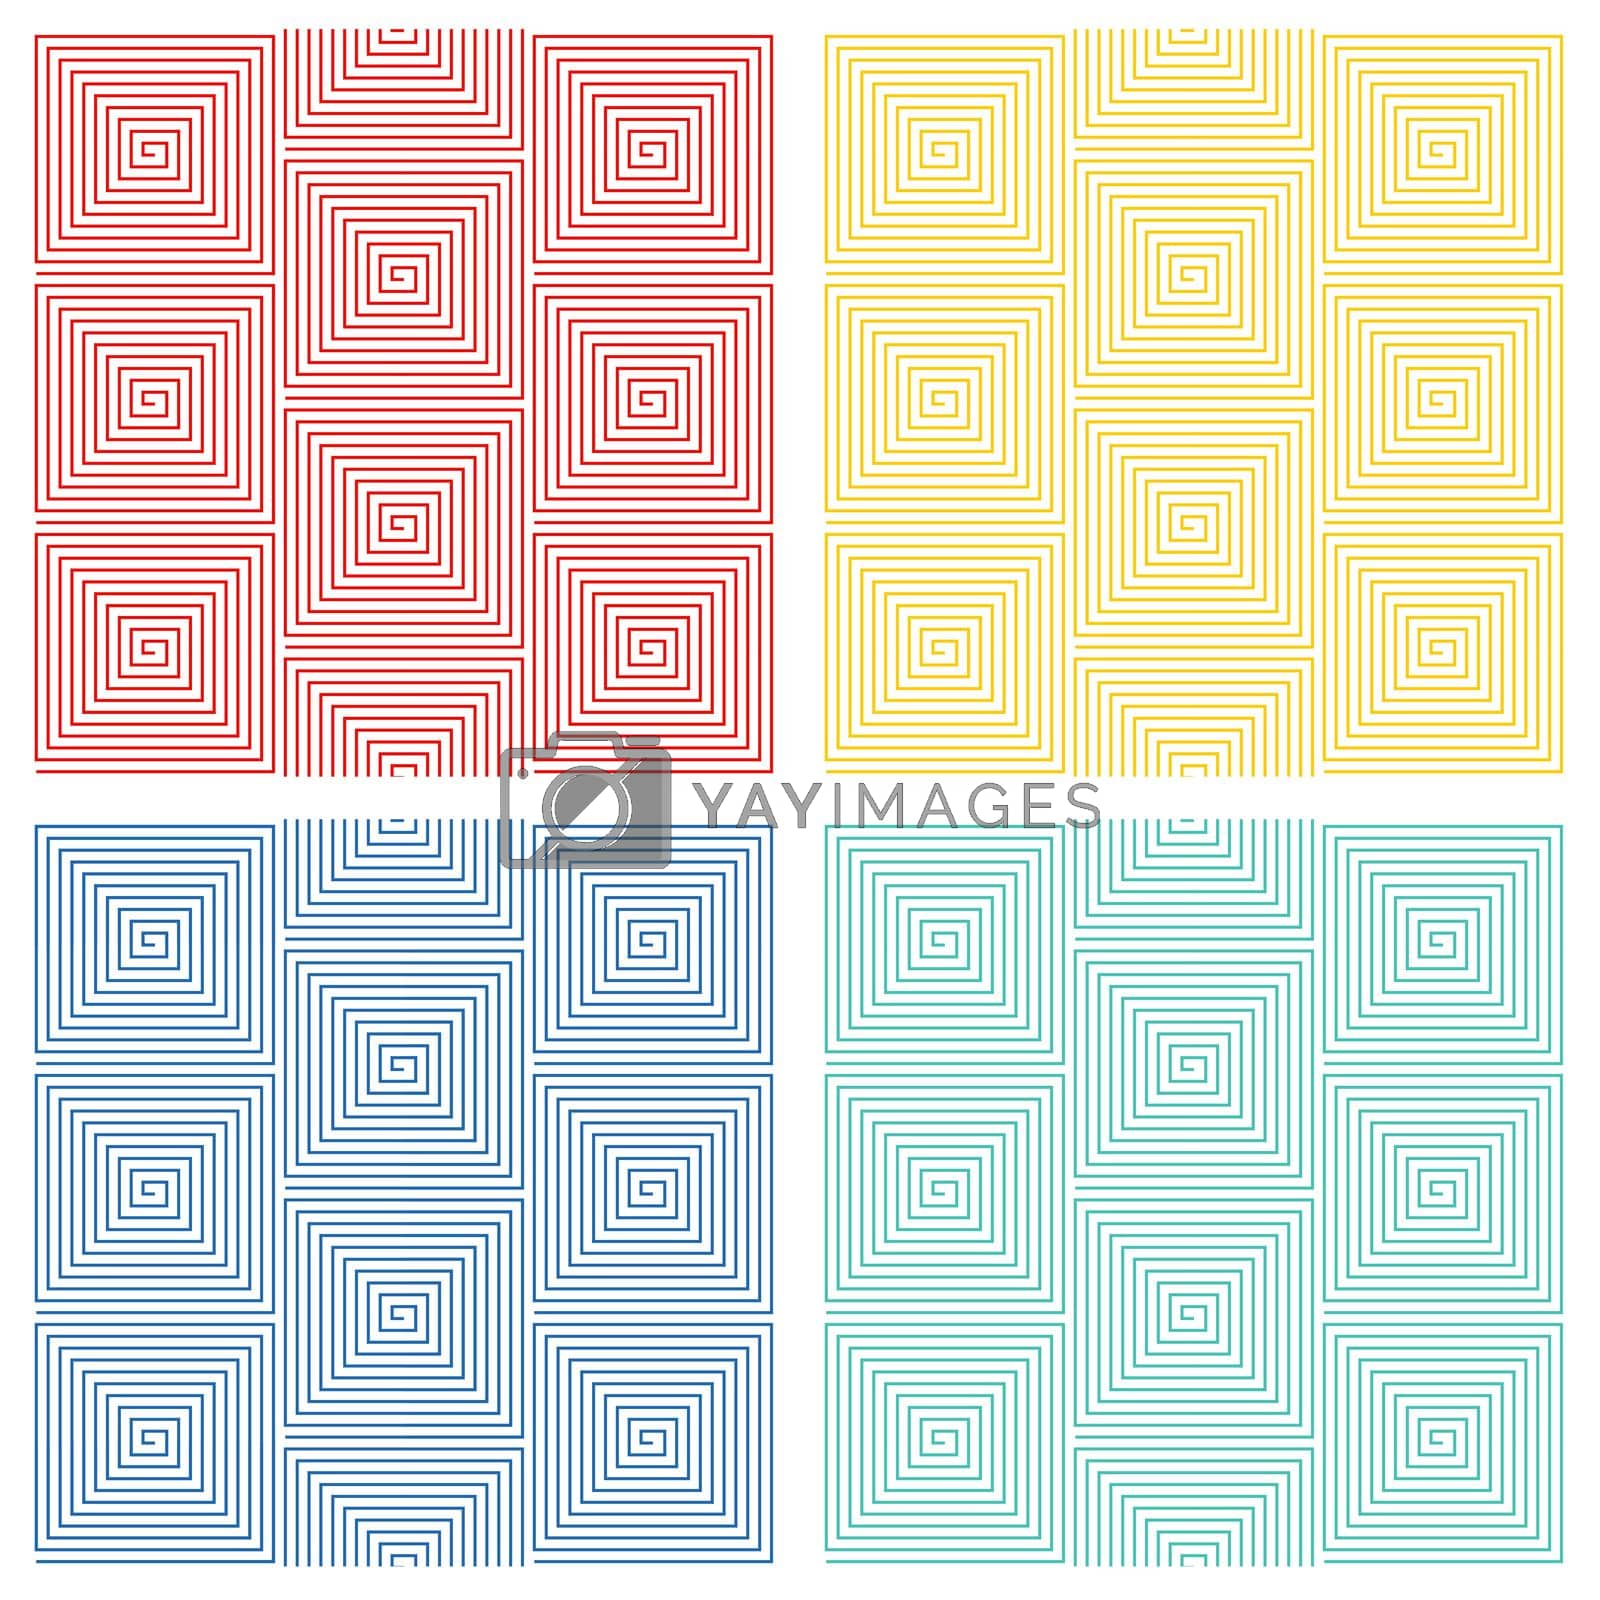 Multicolored Hypnotic Background Seamless Pattern.